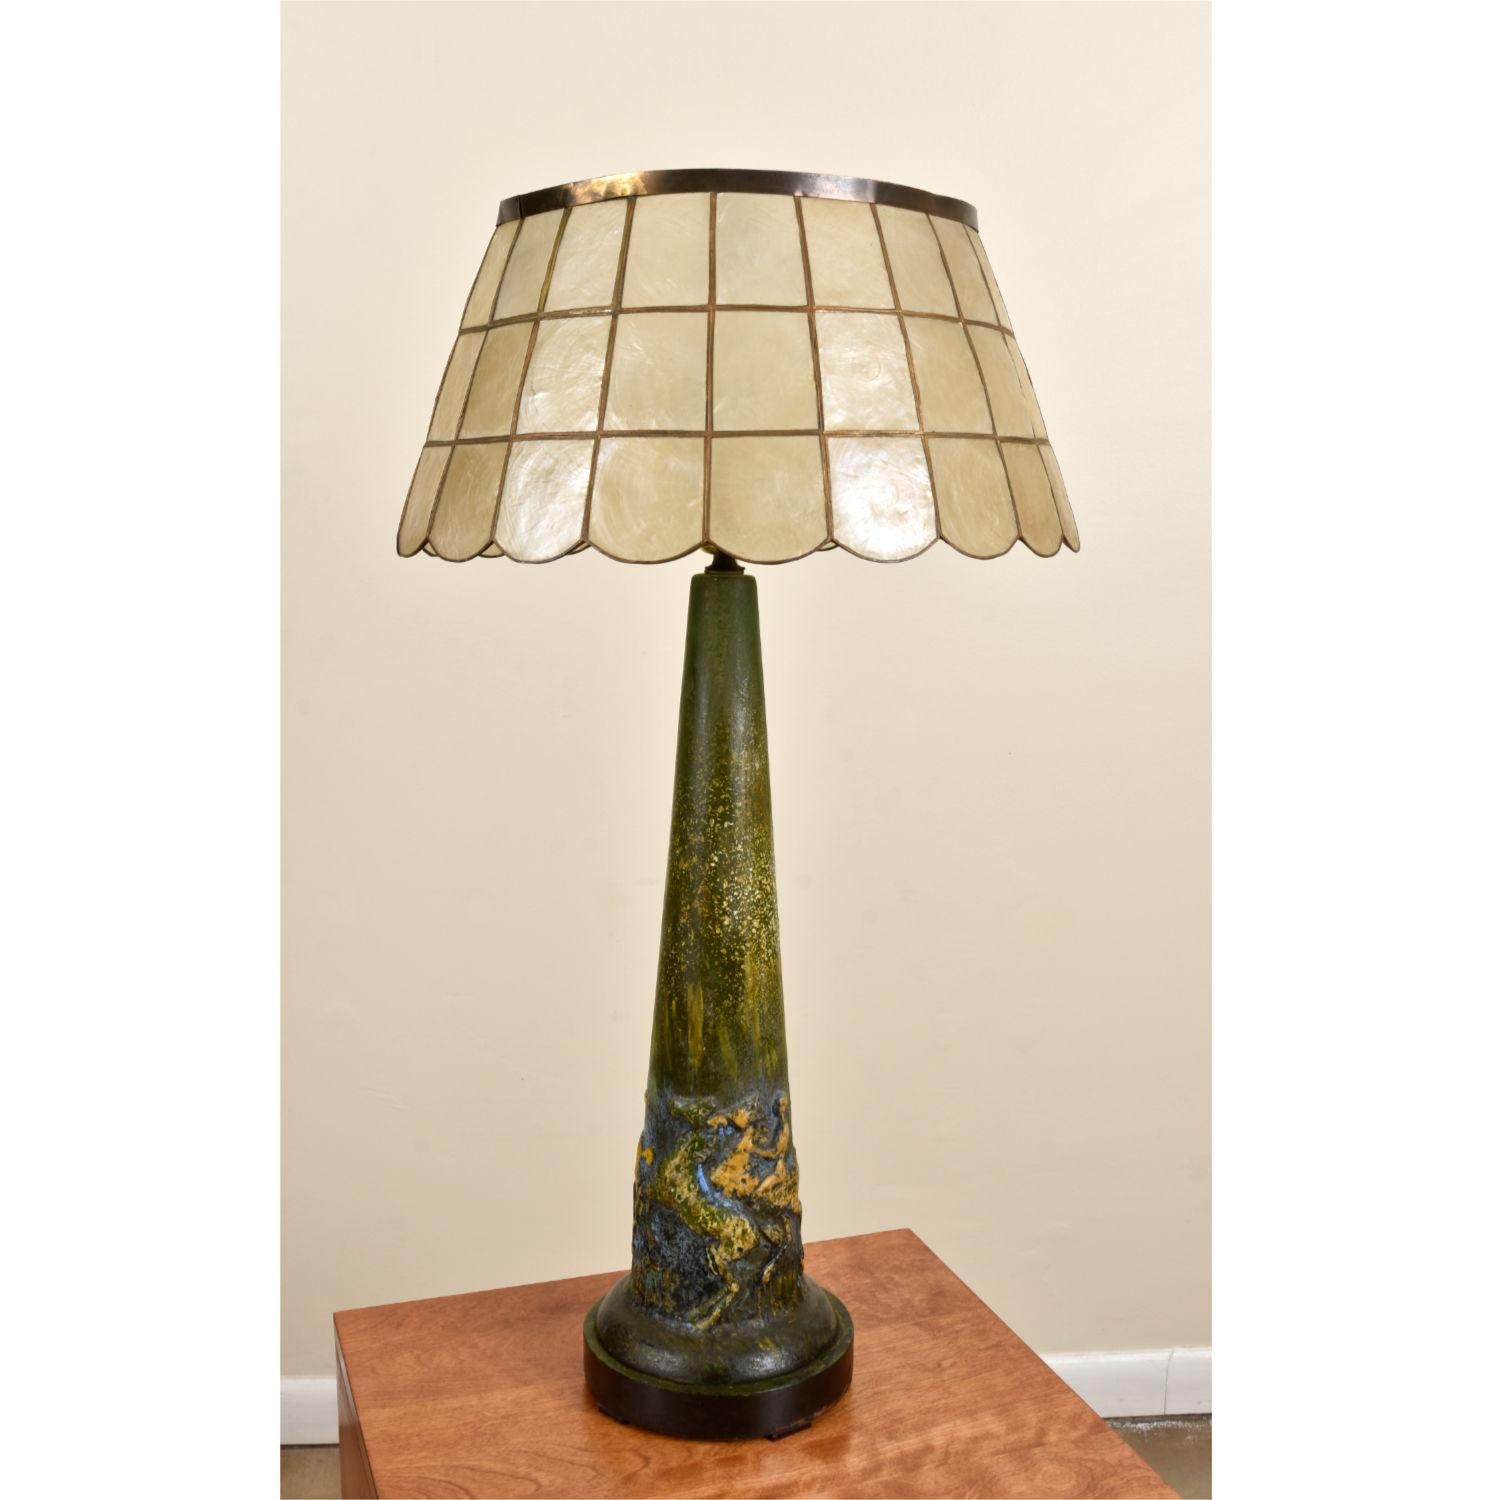 Lacquered Metal on Base with Tulip-Shaped Frosted Glass Accent Vintage Classical Greek Roman Maiden Lamp